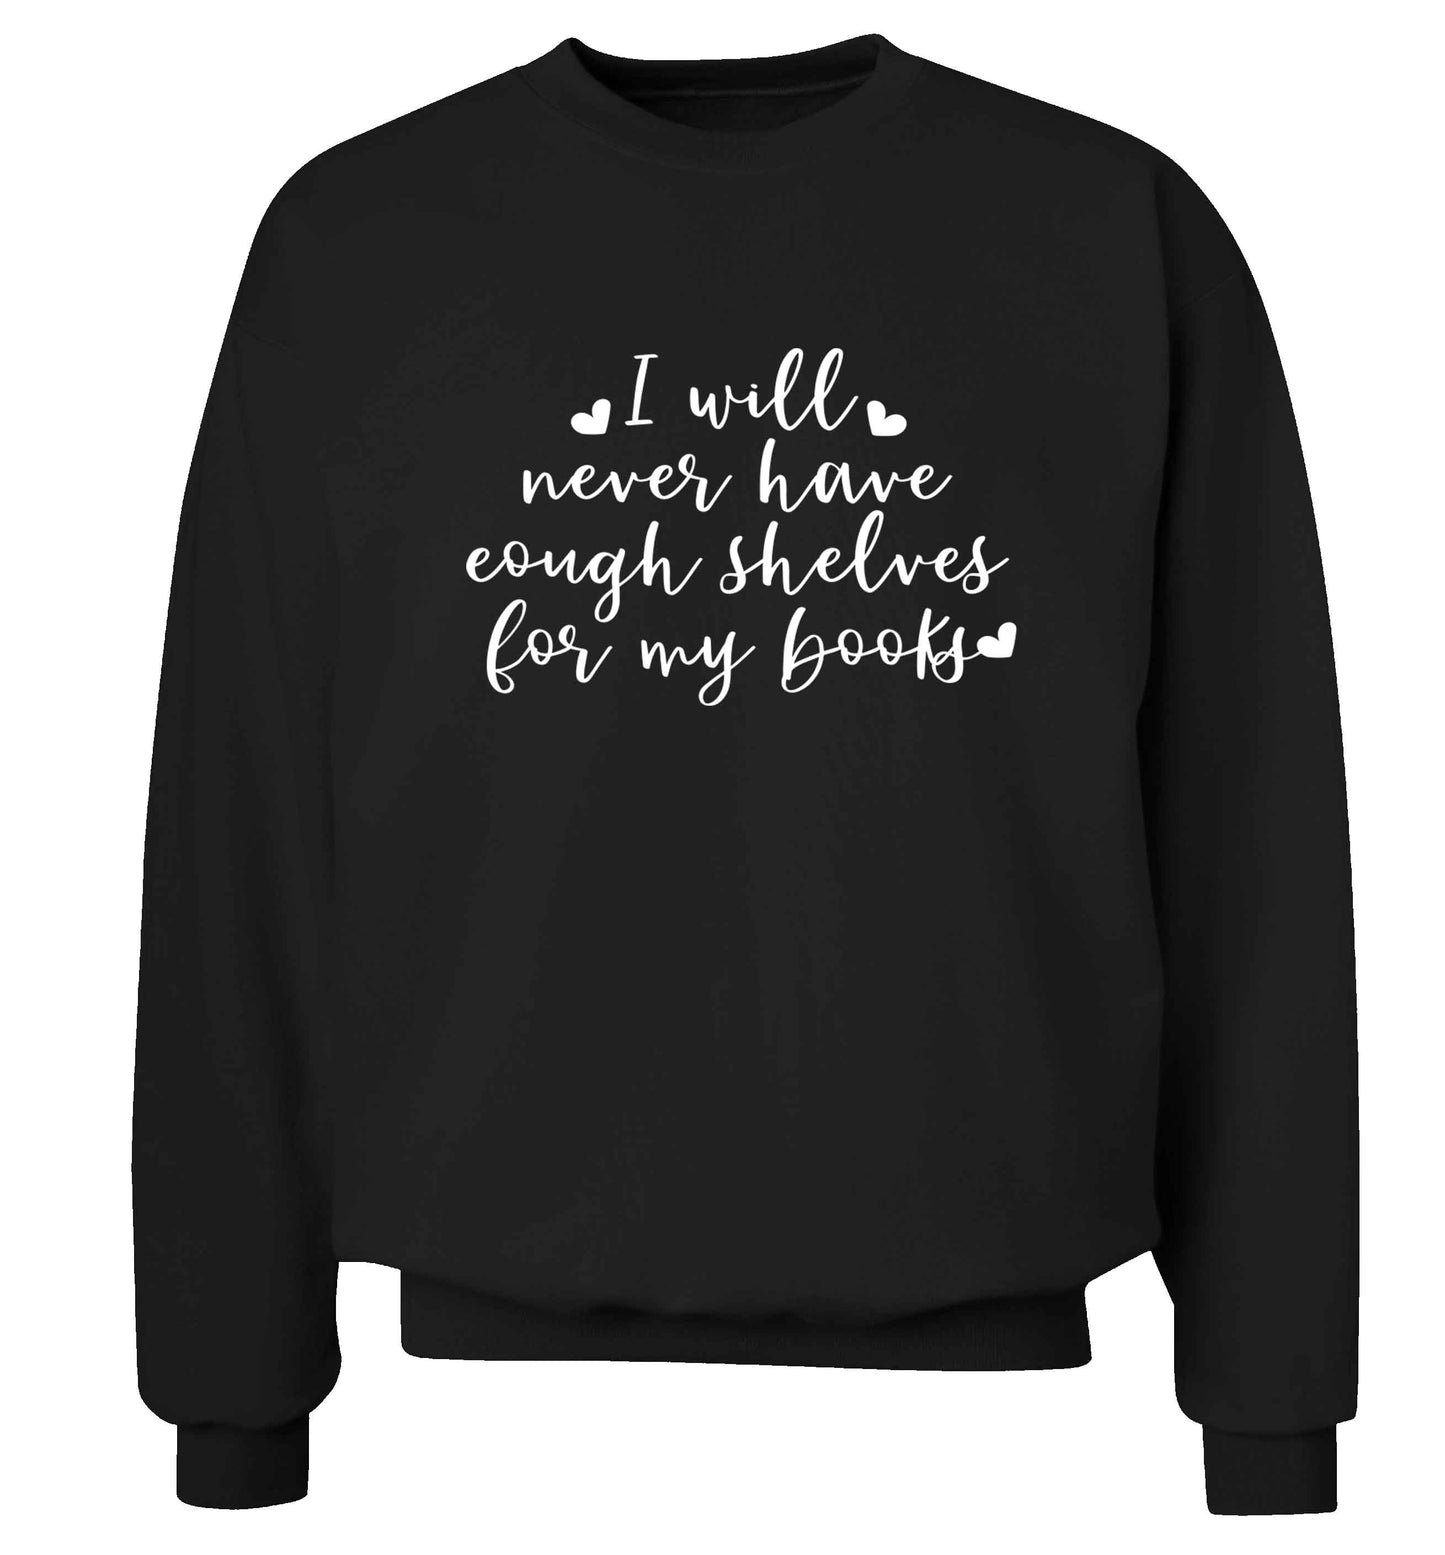 I will never have enough shelves for my books Adult's unisex black Sweater 2XL